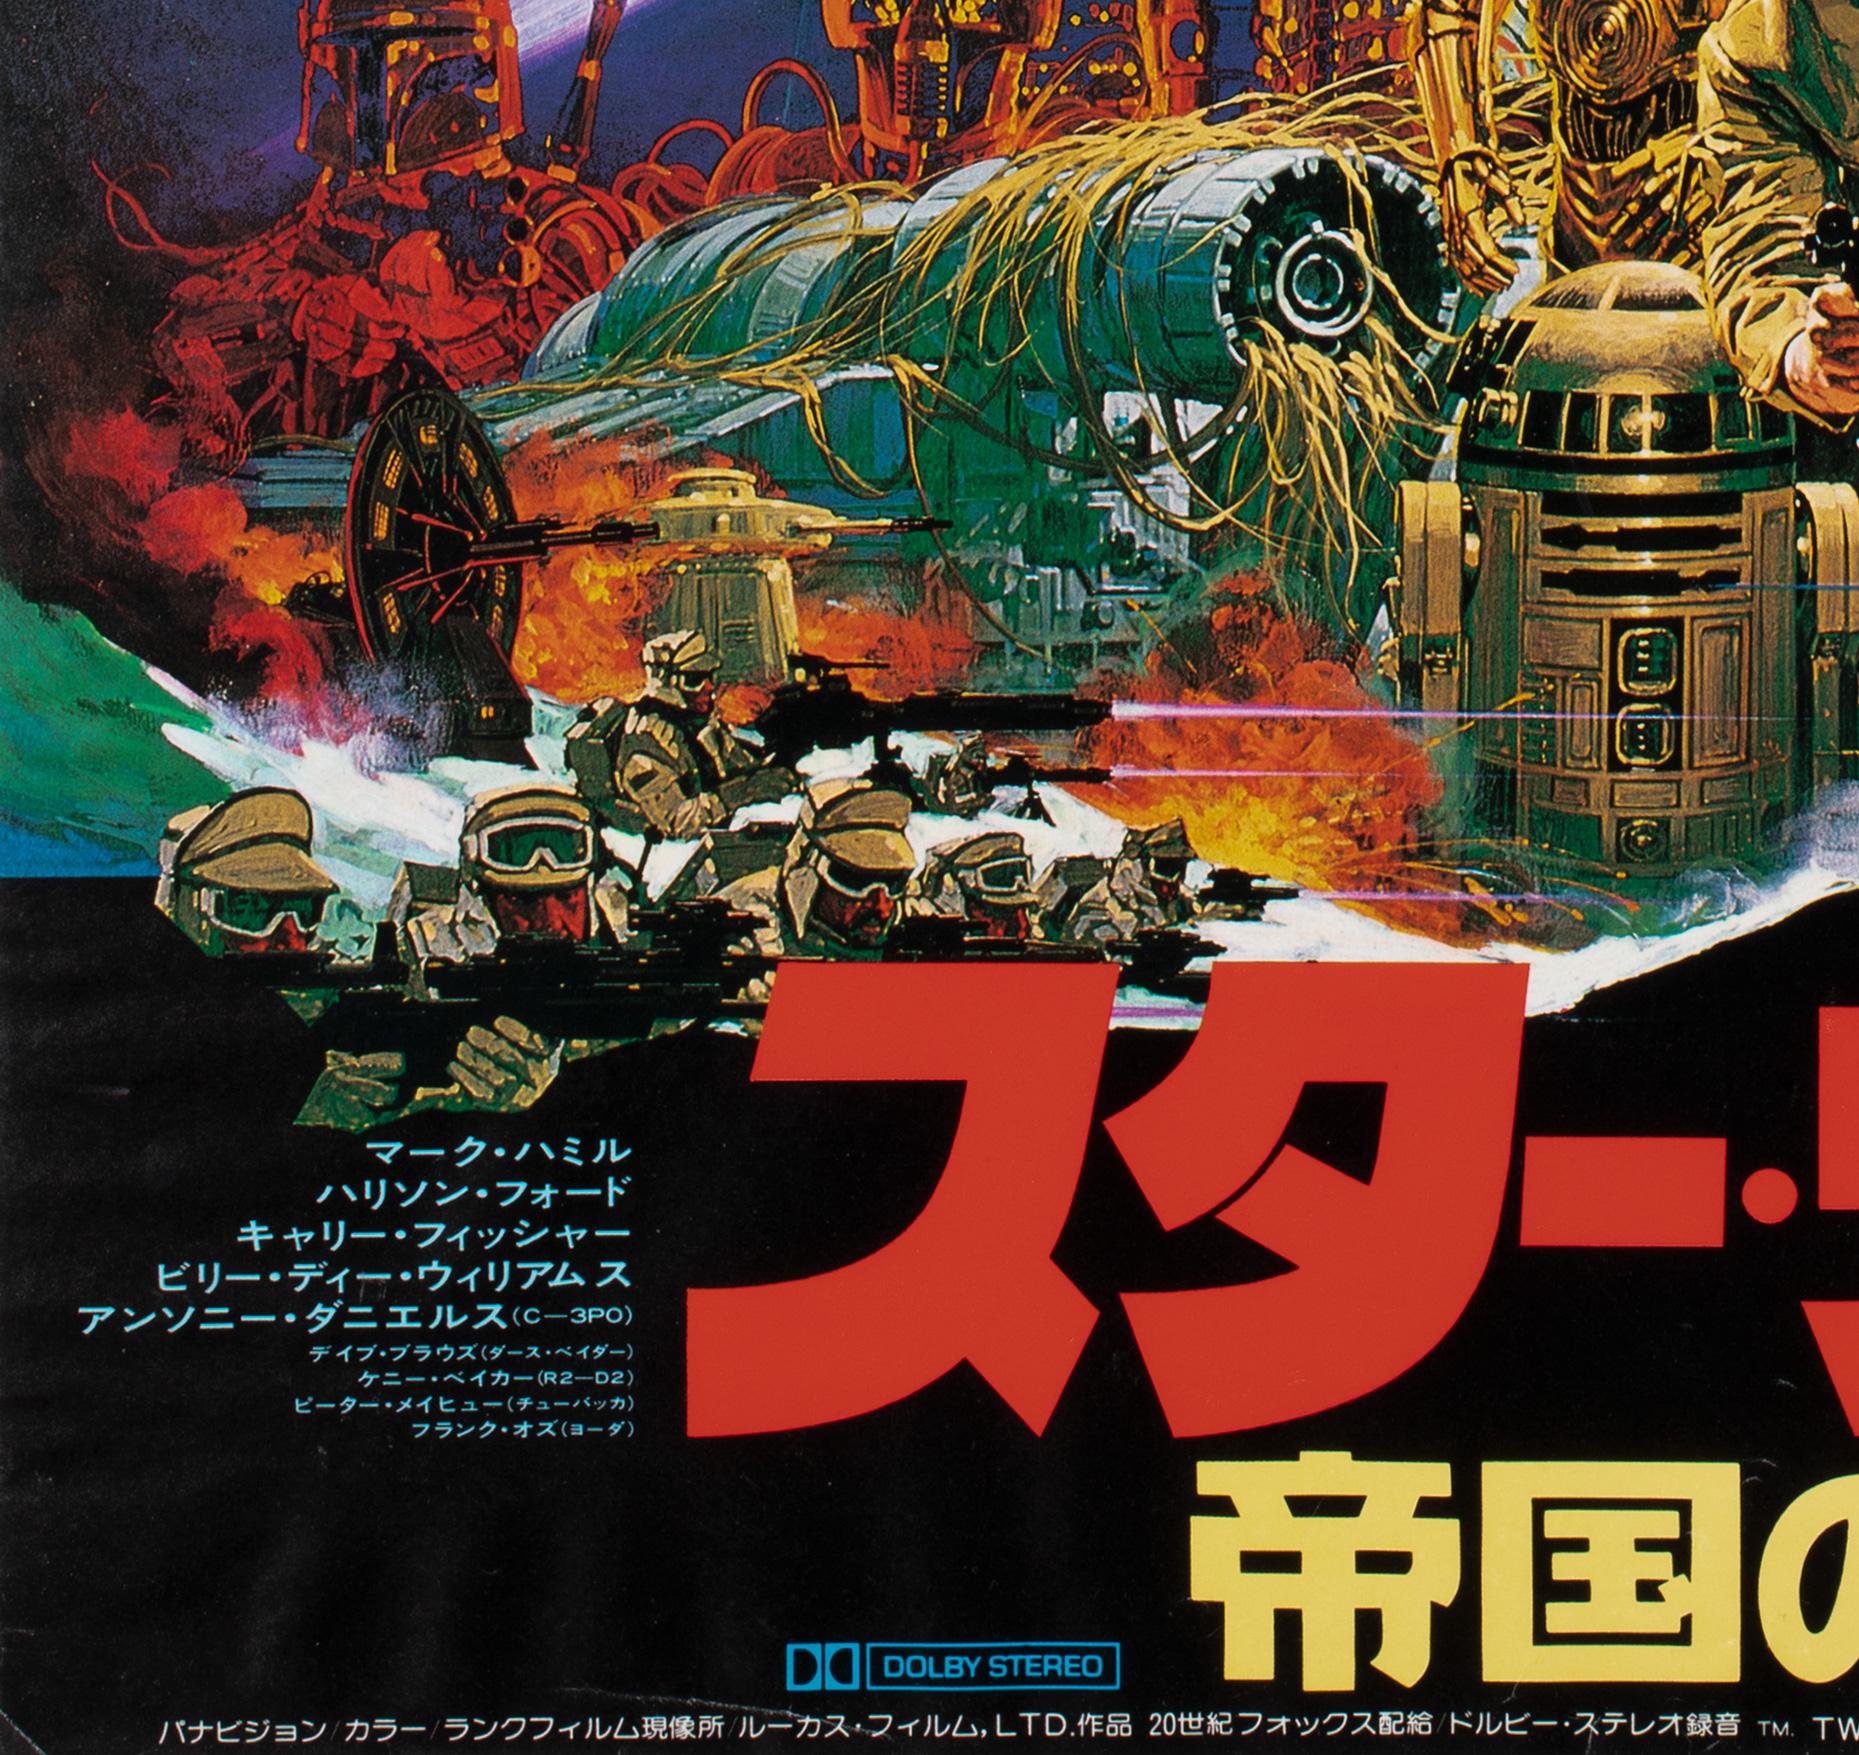 Paper The Empire Strikes Back 1980 Japanese B2 Snow Style Film Movie Poster, Ohrai For Sale